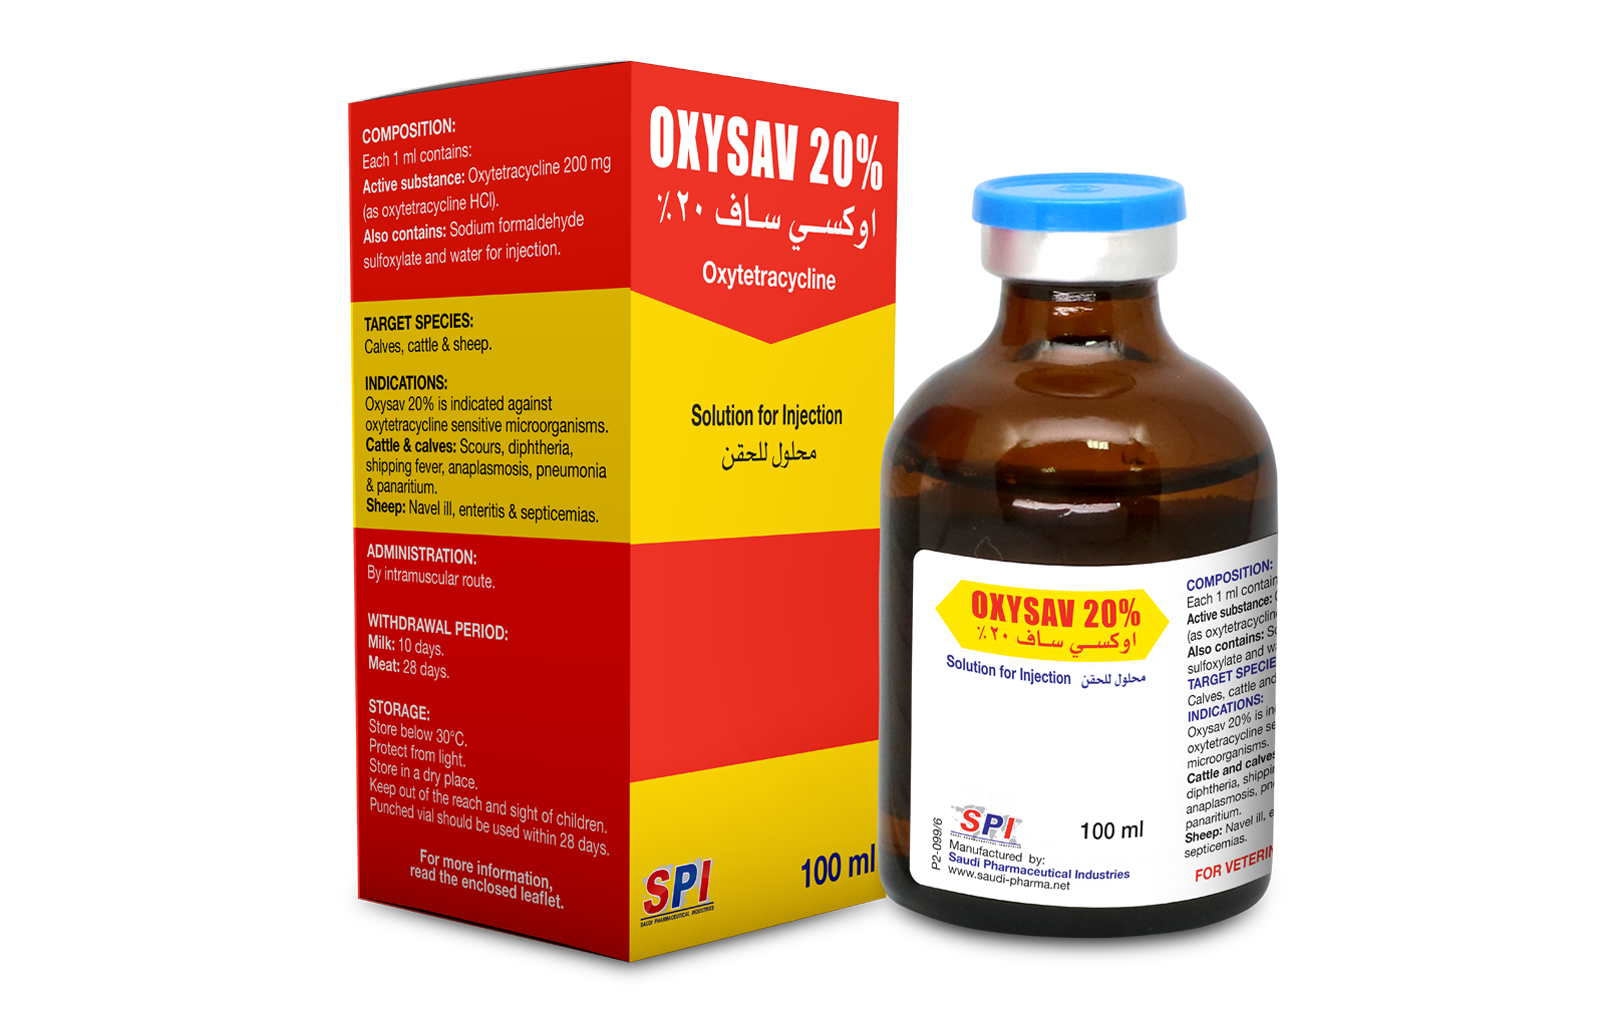 Oxysav 20% Solution for Injection (100 ml)